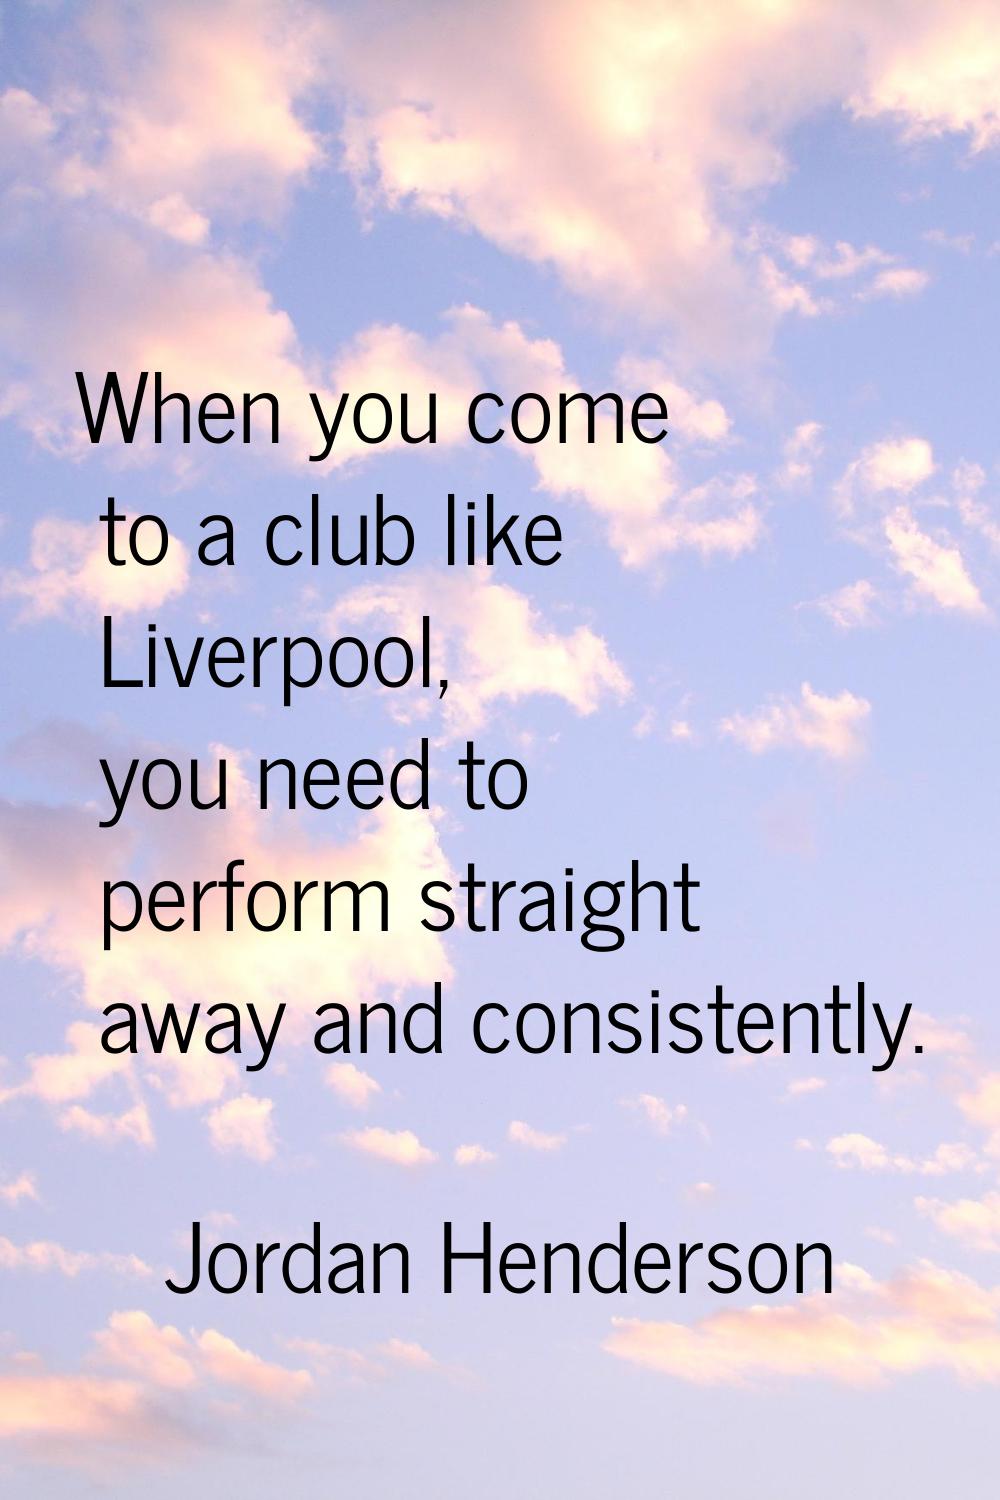 When you come to a club like Liverpool, you need to perform straight away and consistently.